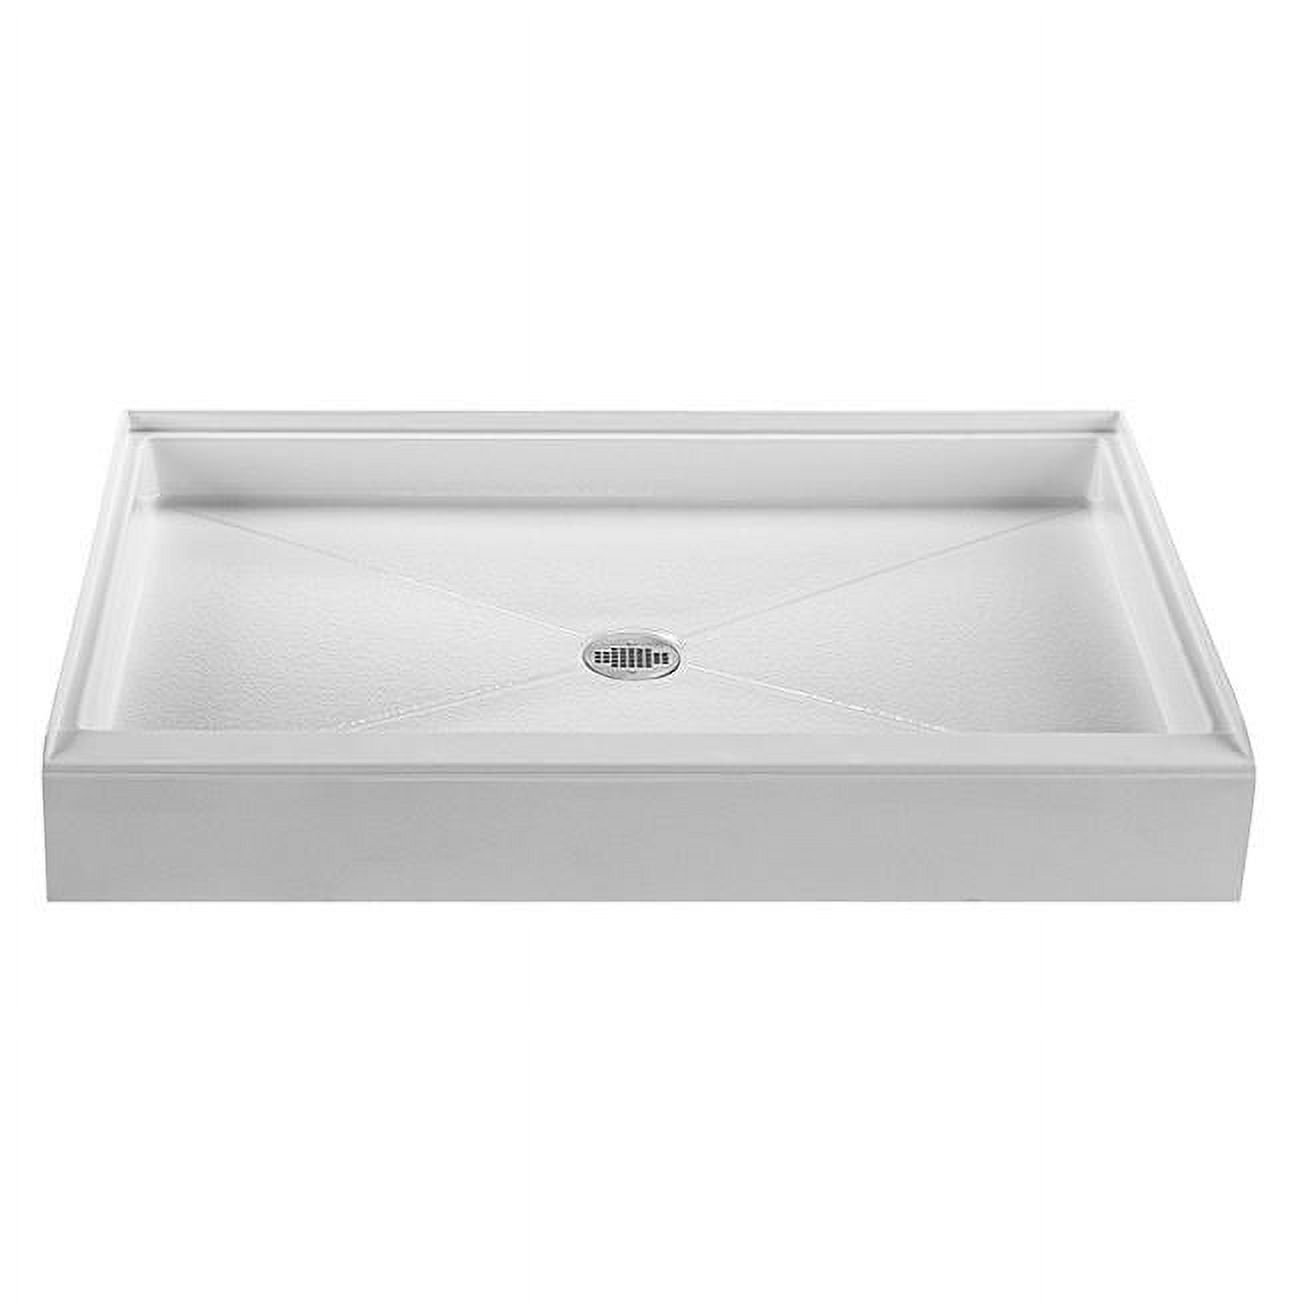 Rectangular End Drain Air Bath, Biscuit - 59.25 x 47.5 x 19.75 in. - image 1 of 1